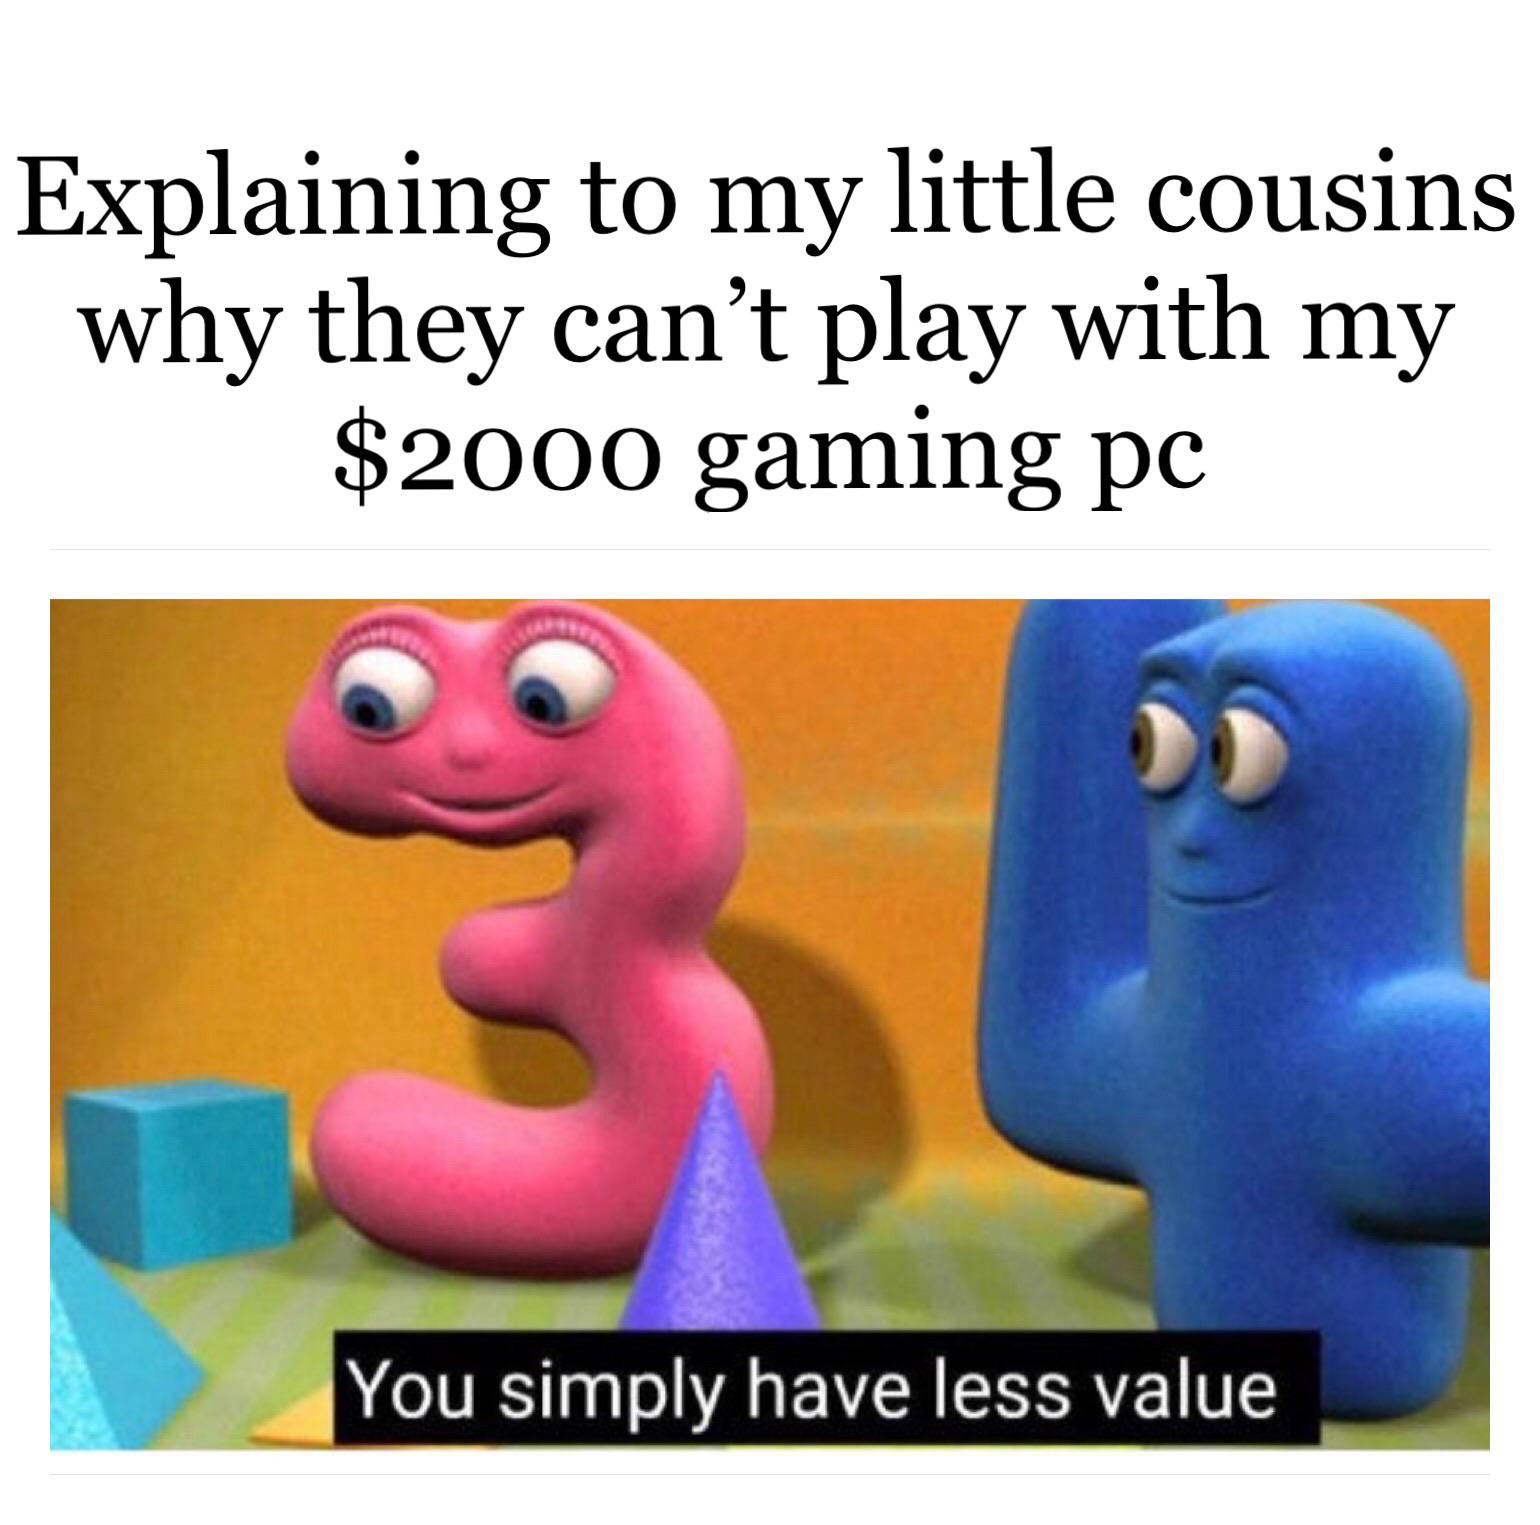 Funny, PC, Indian, NumberJacks, Jack, HE NUMBERS MASON other memes Funny, PC, Indian, NumberJacks, Jack, HE NUMBERS MASON text: Explaining to my little cousins why they can't play with my $2000 gaming pc You simply have less value 